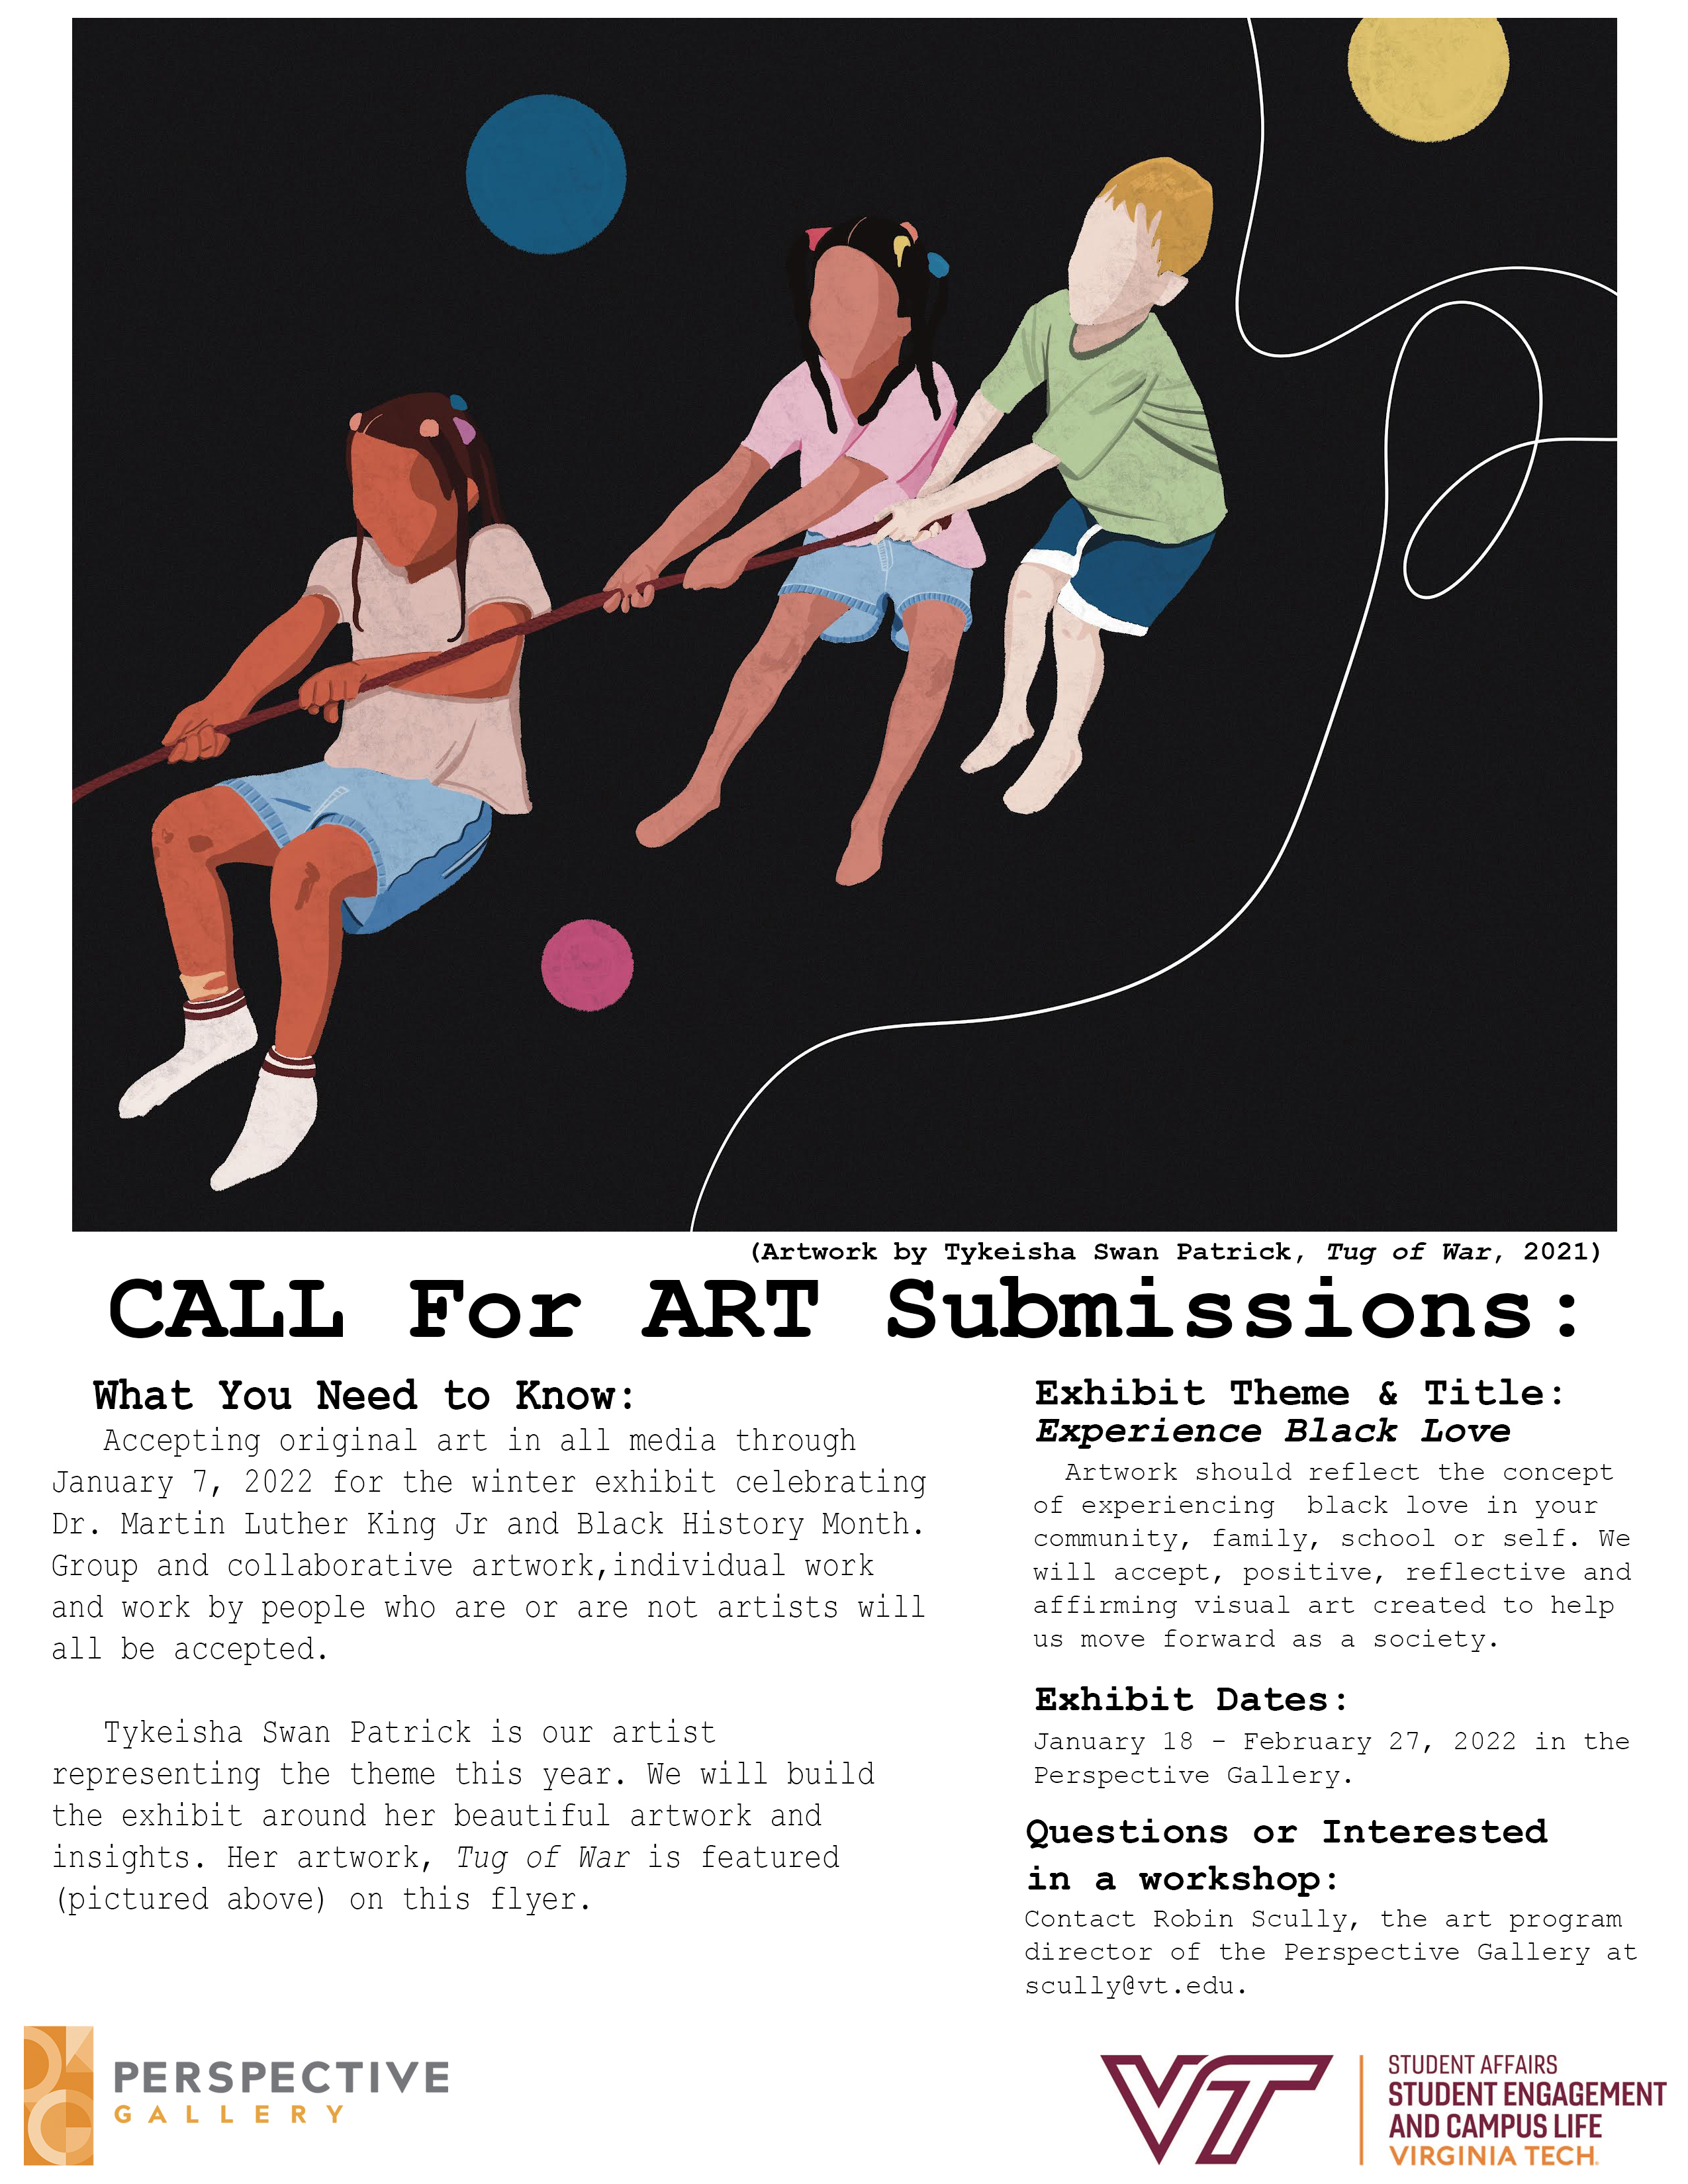 Call for Art Submissions